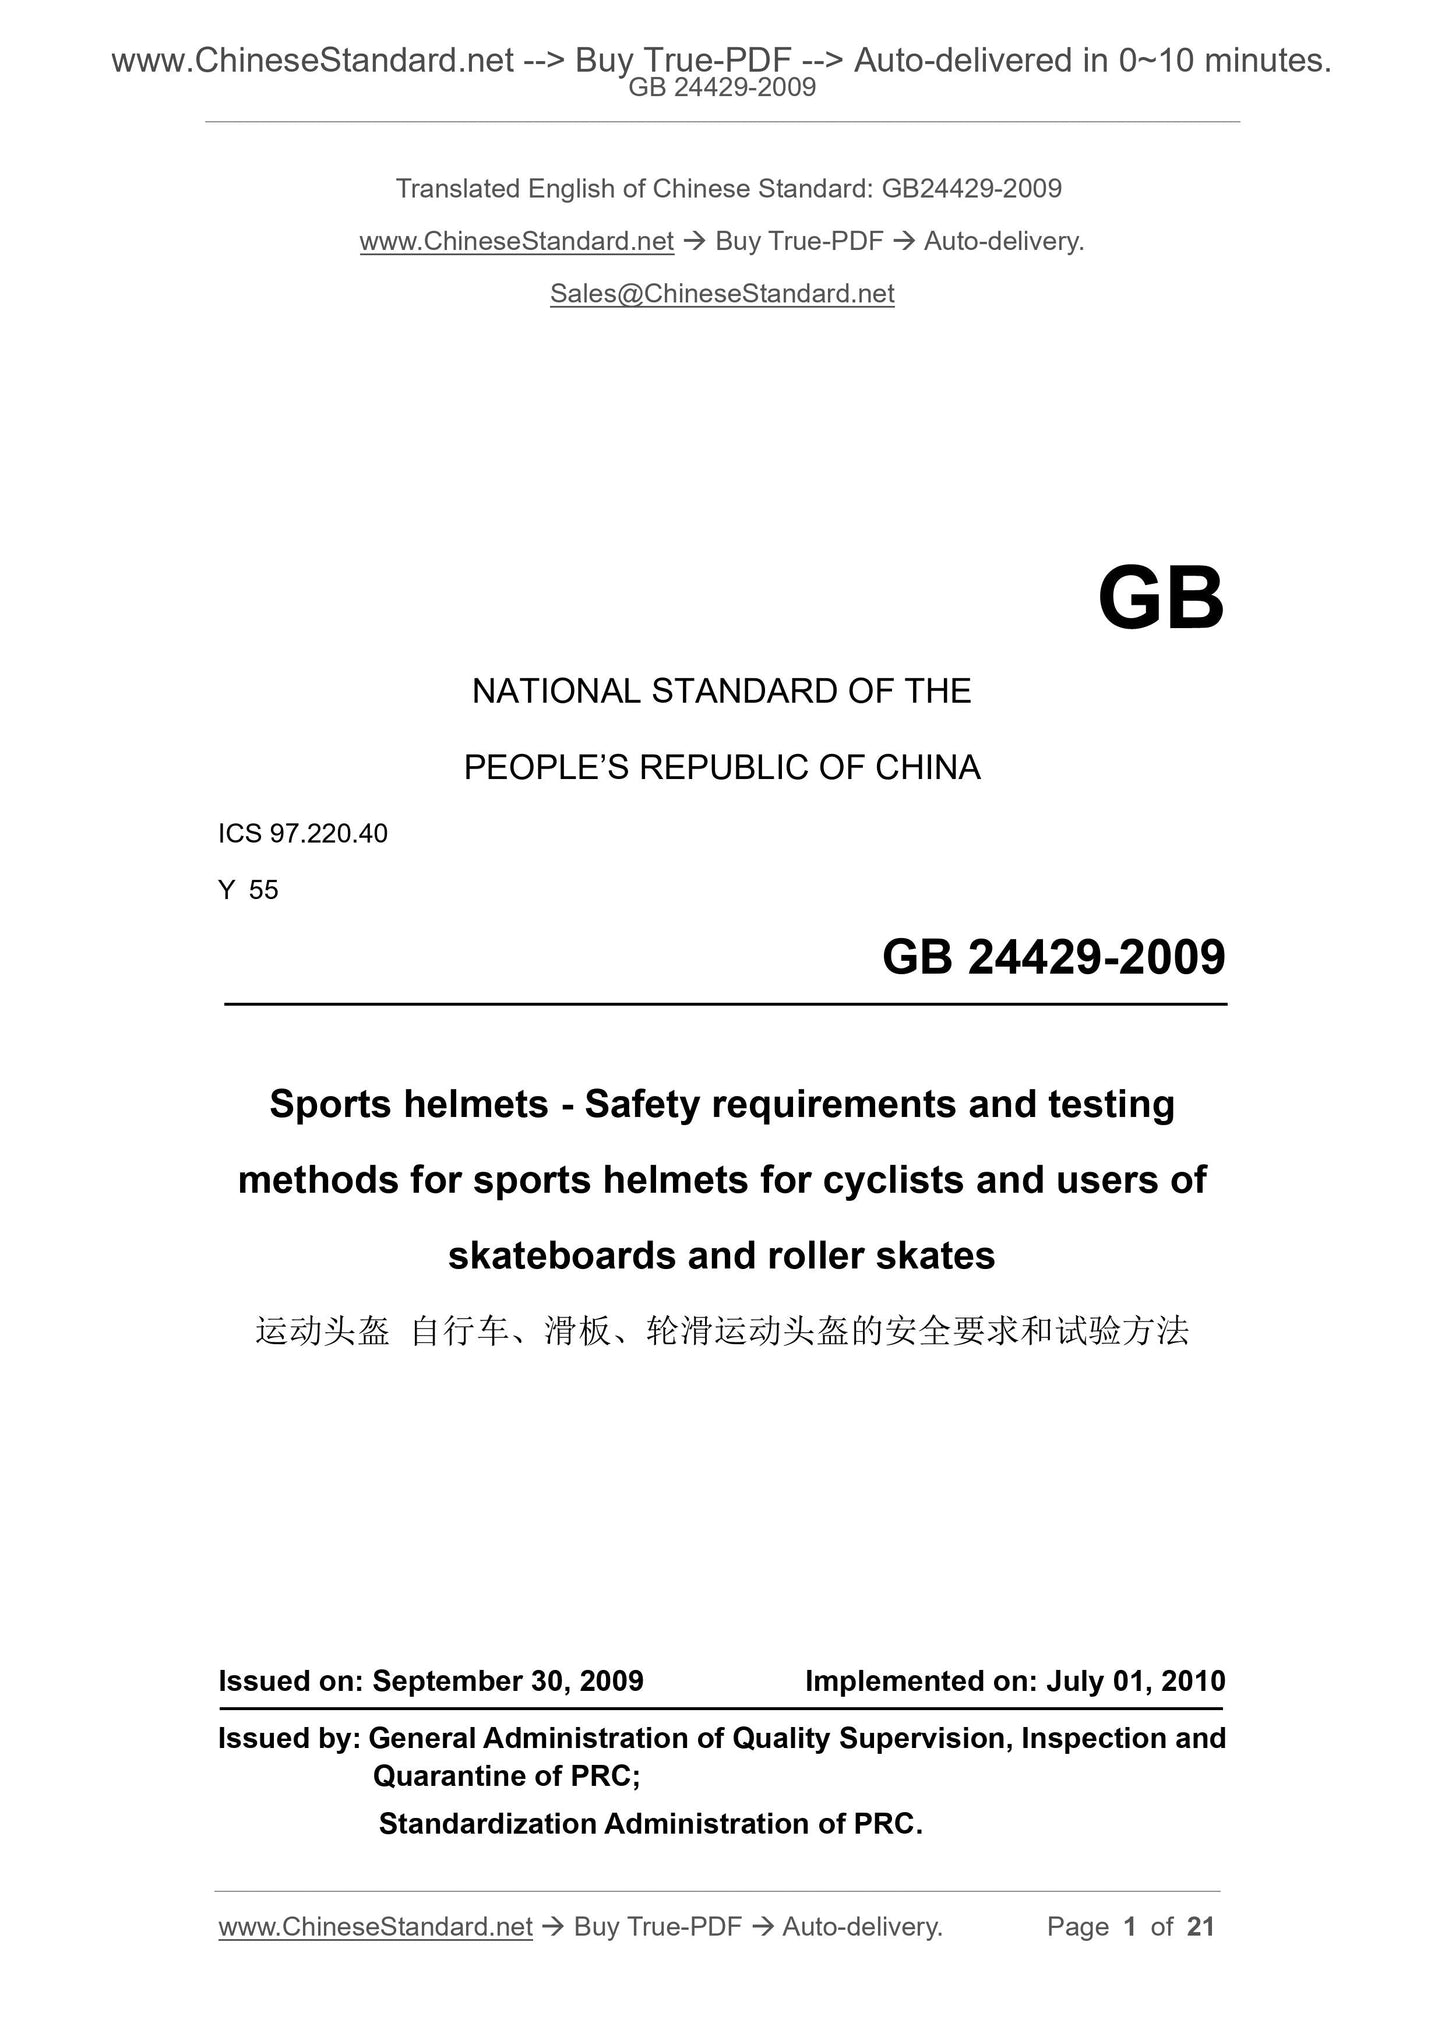 GB 24429-2009 Page 1